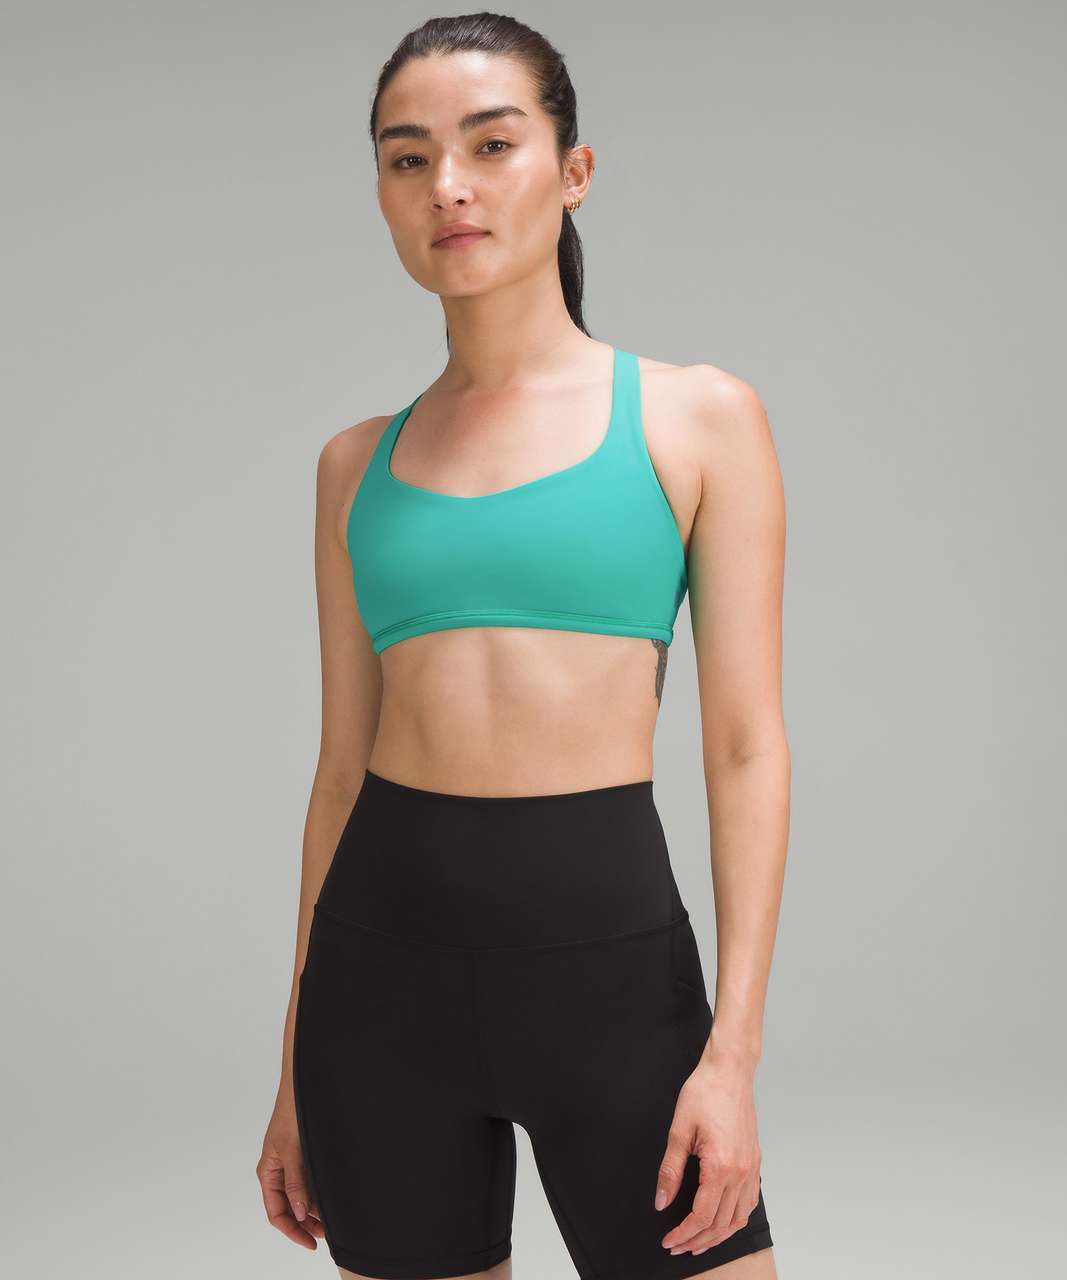 WMTM Score: HN LL Free to Be Wild bra in Rainforest Green, 8 🌲💚 (paired  with Black Crunch WTs, 6) : r/lululemon